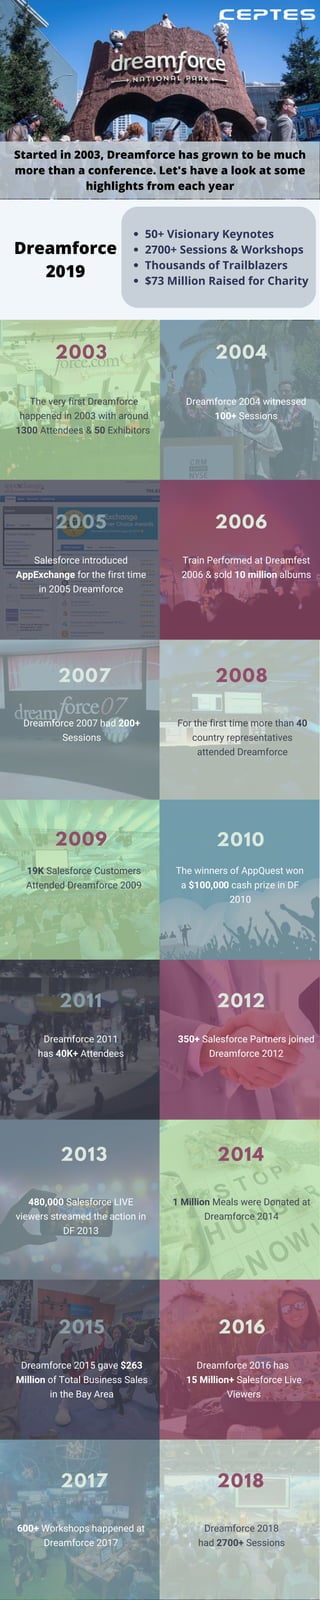 Started in 2003, Dreamforce has grown to be much
more than a conference. Let's have a look at some
highlights from each year
Dreamforce
2019
50+ Visionary Keynotes
2700+ Sessions & Workshops
Thousands of Trailblazers
$73 Million Raised for Charity
   
   
The very first Dreamforce
happened in 2003 with around
1300 Attendees & 50 Exhibitors
2003
Dreamforce 2004 witnessed
100+ Sessions
2004
2005
Salesforce introduced
AppExchange for the first time
in 2005 Dreamforce
Train Performed at Dreamfest
2006 & sold 10 million albums
2006
2007
Dreamforce 2007 had 200+
Sessions
For the first time more than 40
country representatives
attended Dreamforce
2008
19K Salesforce Customers
Attended Dreamforce 2009
2009
2011
Dreamforce 2011
has 40K+ Attendees
350+ Salesforce Partners joined
Dreamforce 2012
2012
2013
480,000 Salesforce LIVE
viewers streamed the action in
DF 2013
1 Million Meals were Donated at
Dreamforce 2014
2014
Dreamforce 2016 has 
15 Million+ Salesforce Live
Viewers
2016
Dreamforce 2018
had 2700+ Sessions
2018
2015
Dreamforce 2015 gave $263
Million of Total Business Sales
in the Bay Area
2017
600+ Workshops happened at
Dreamforce 2017
The winners of AppQuest won
a $100,000 cash prize in DF
2010
2010
 